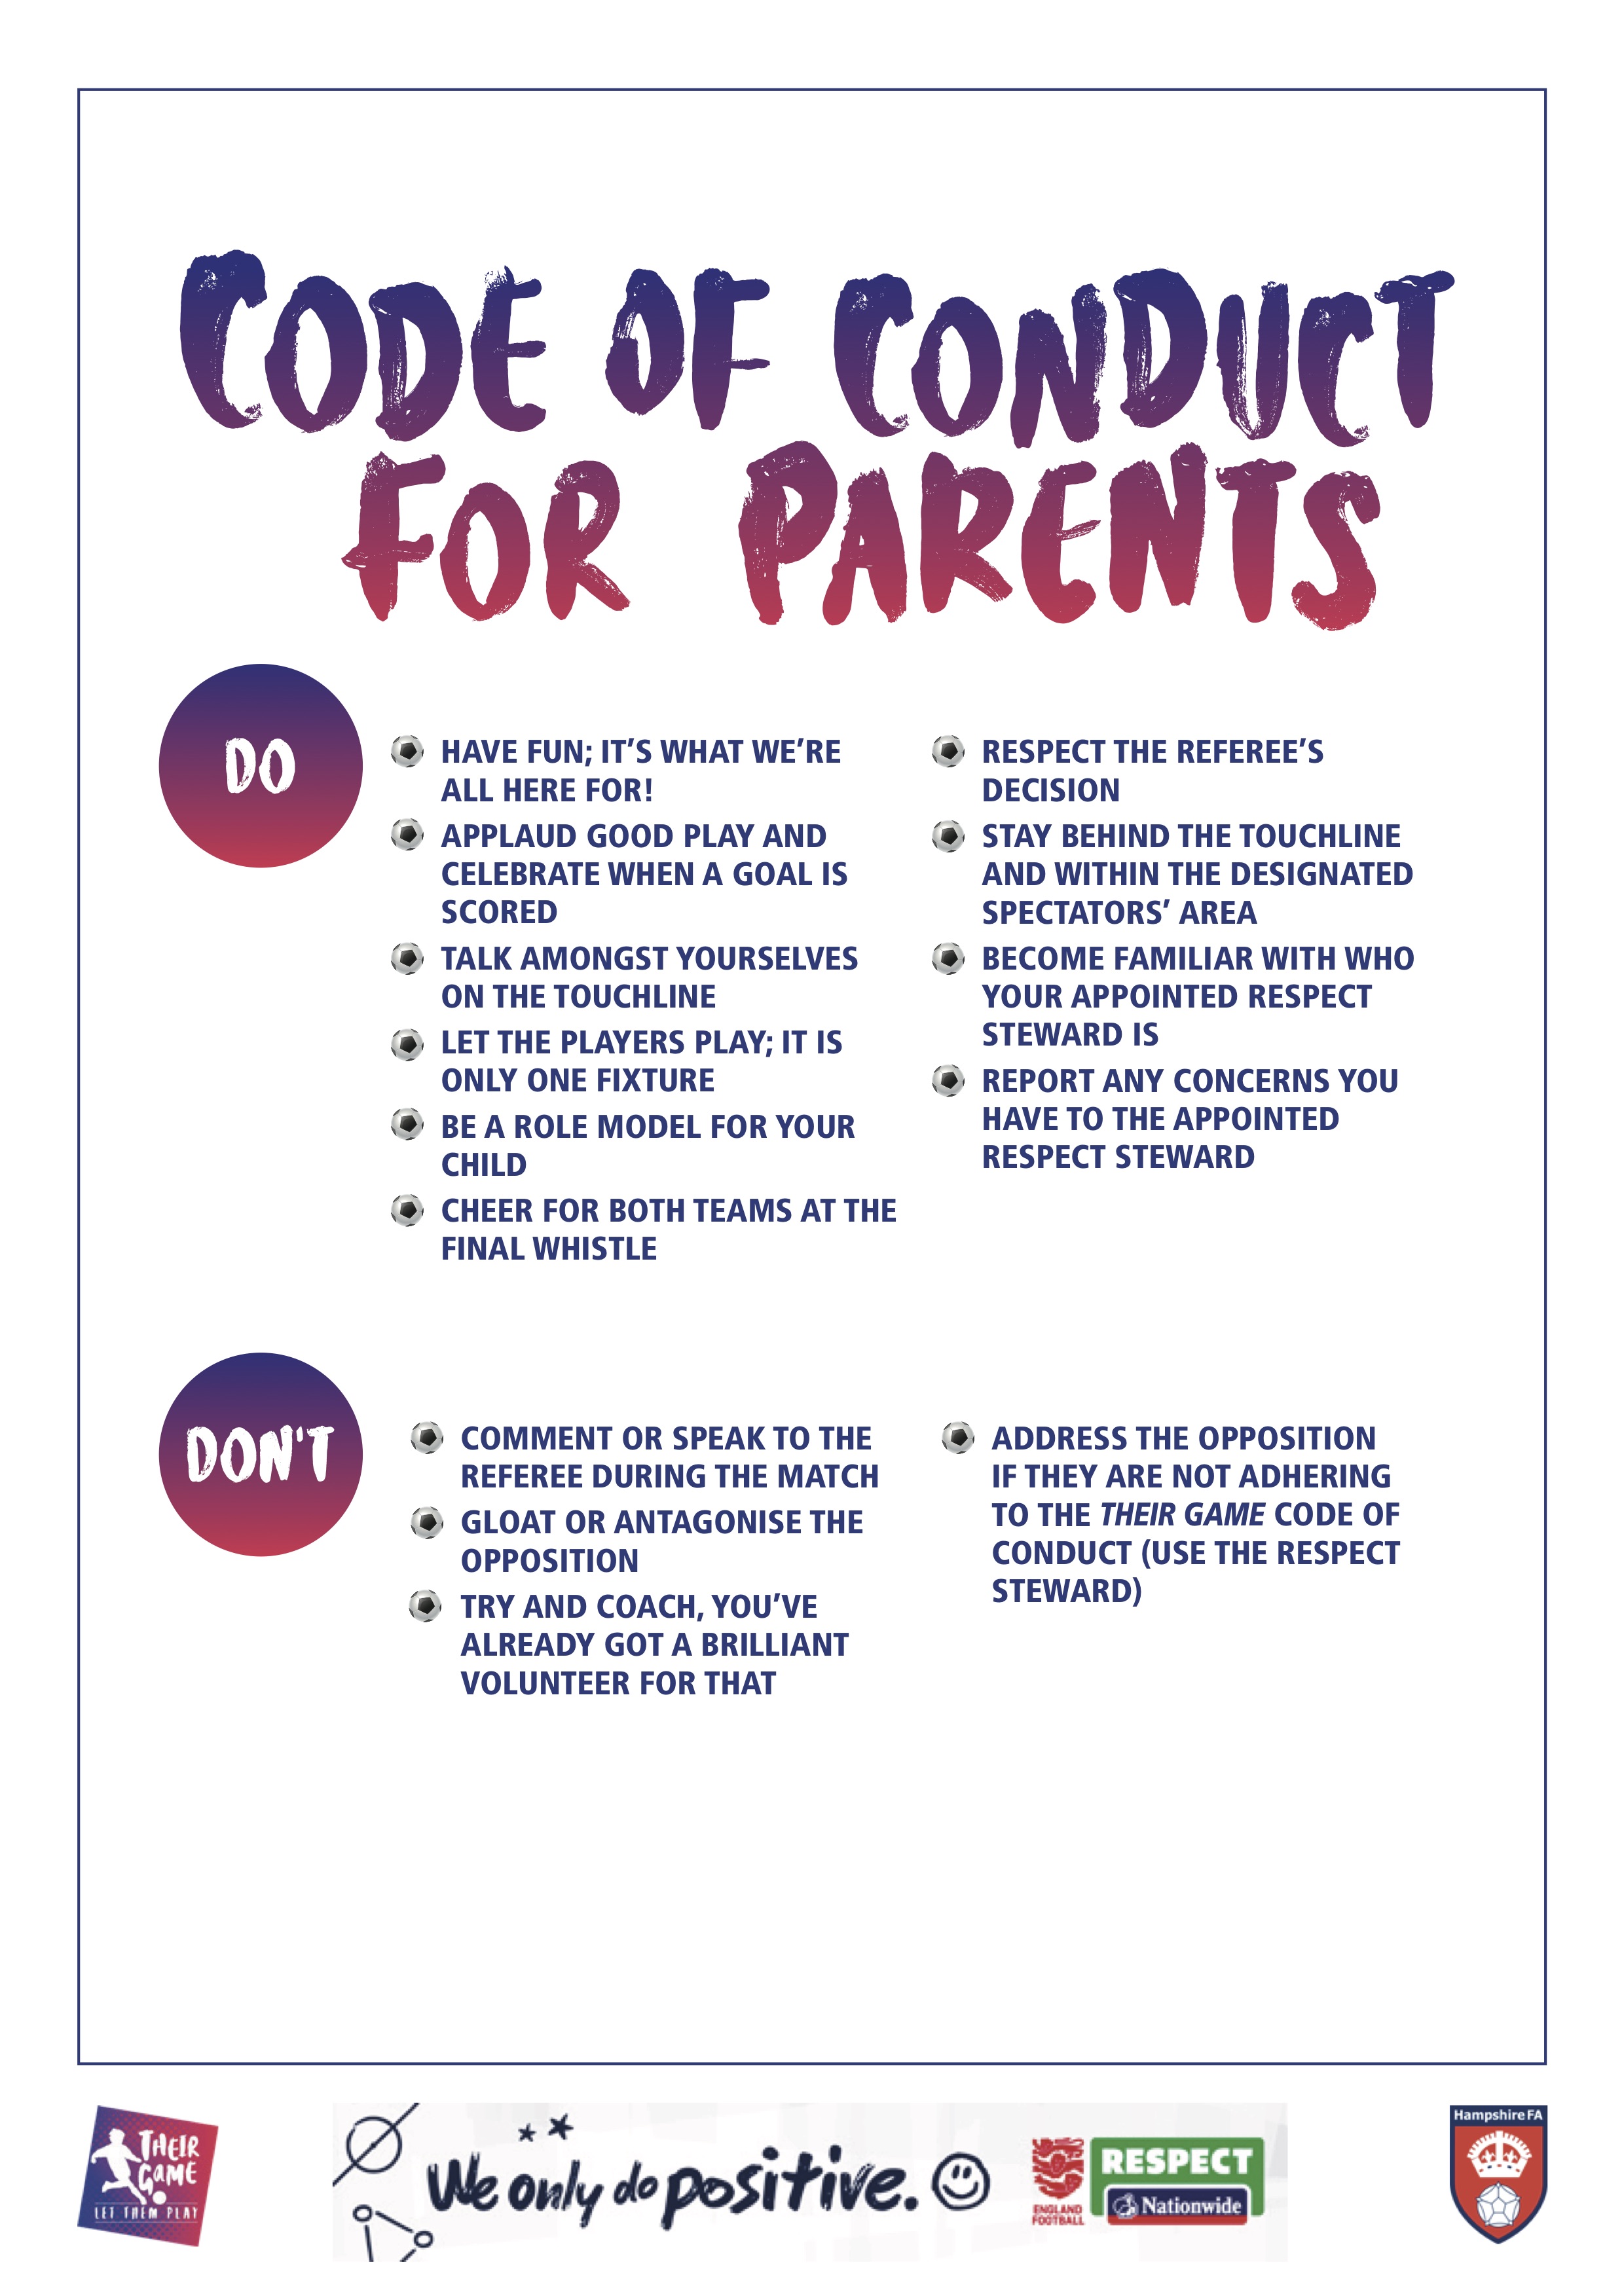 Their Game - Code of Conduct